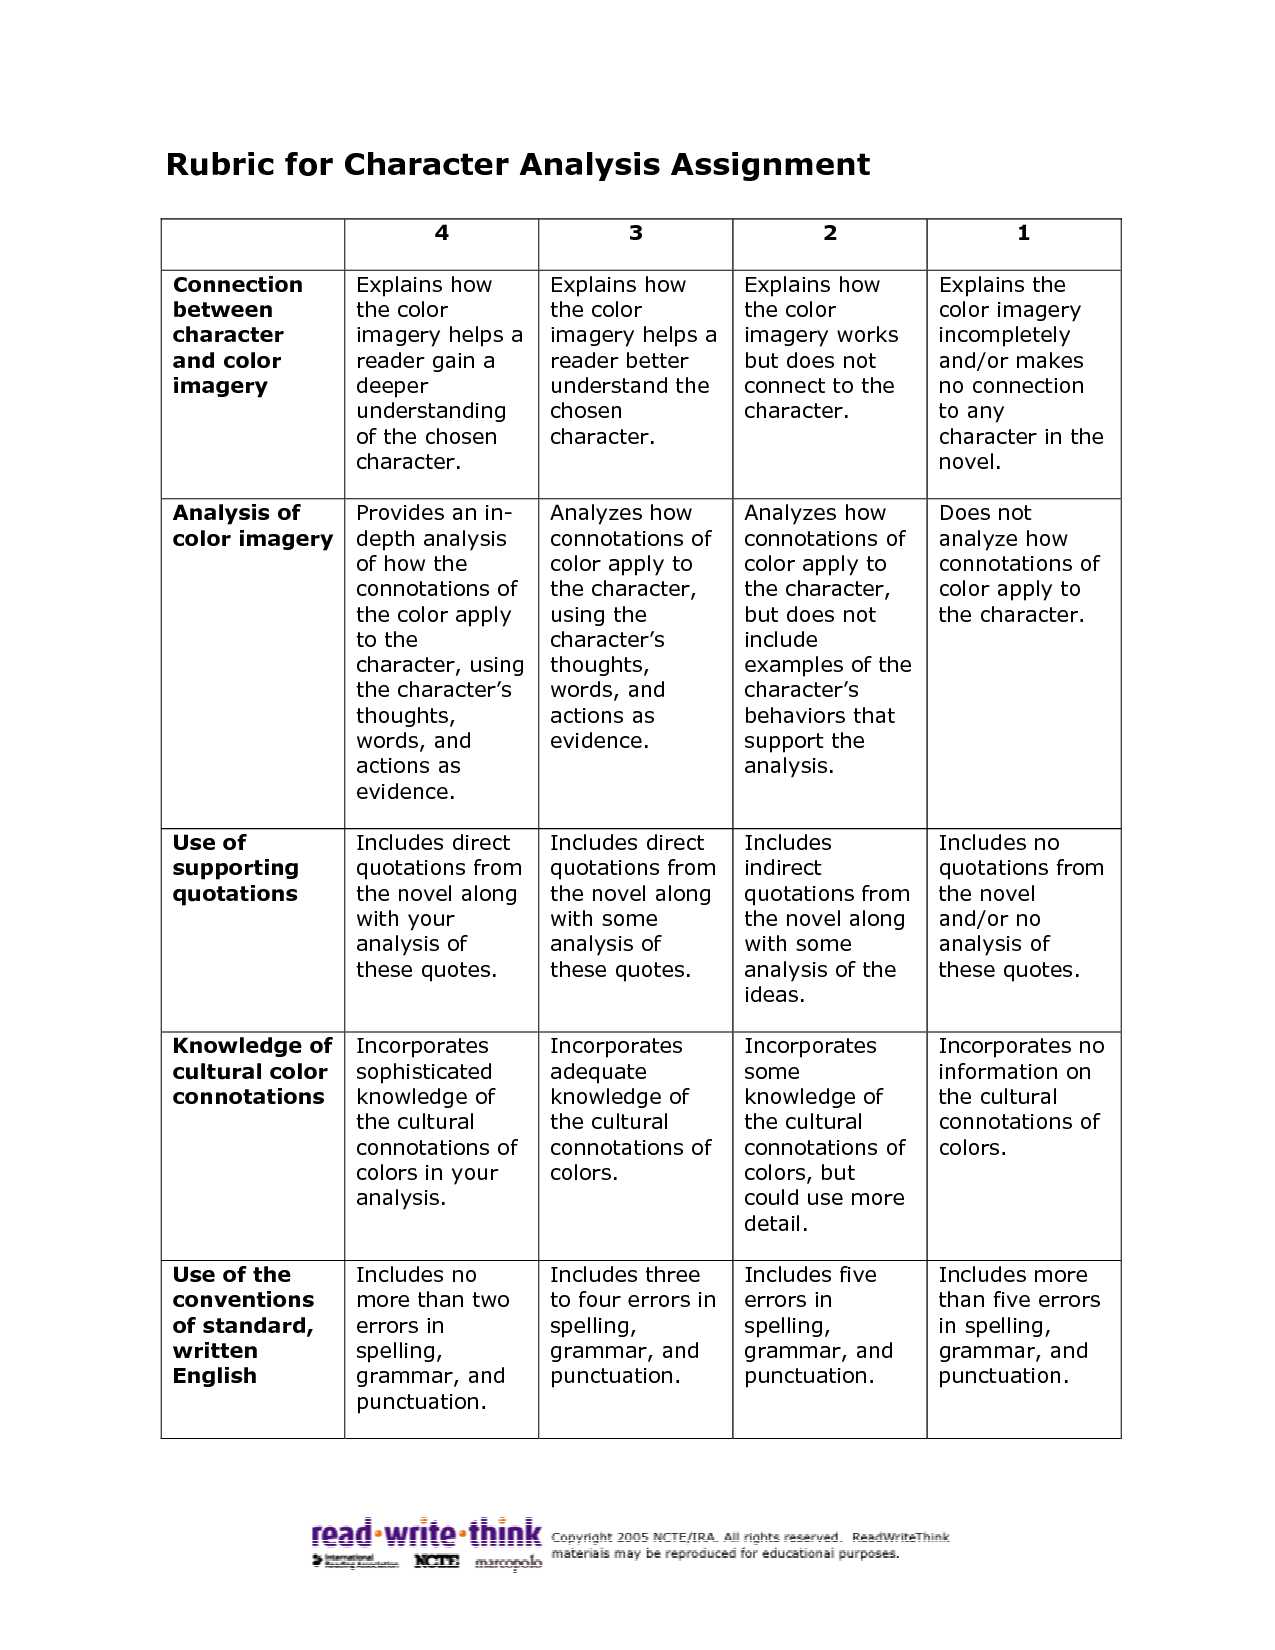 Guided Reading Activity 2 1 Economic Systems Worksheet Answers and Rubric for Character Analysis